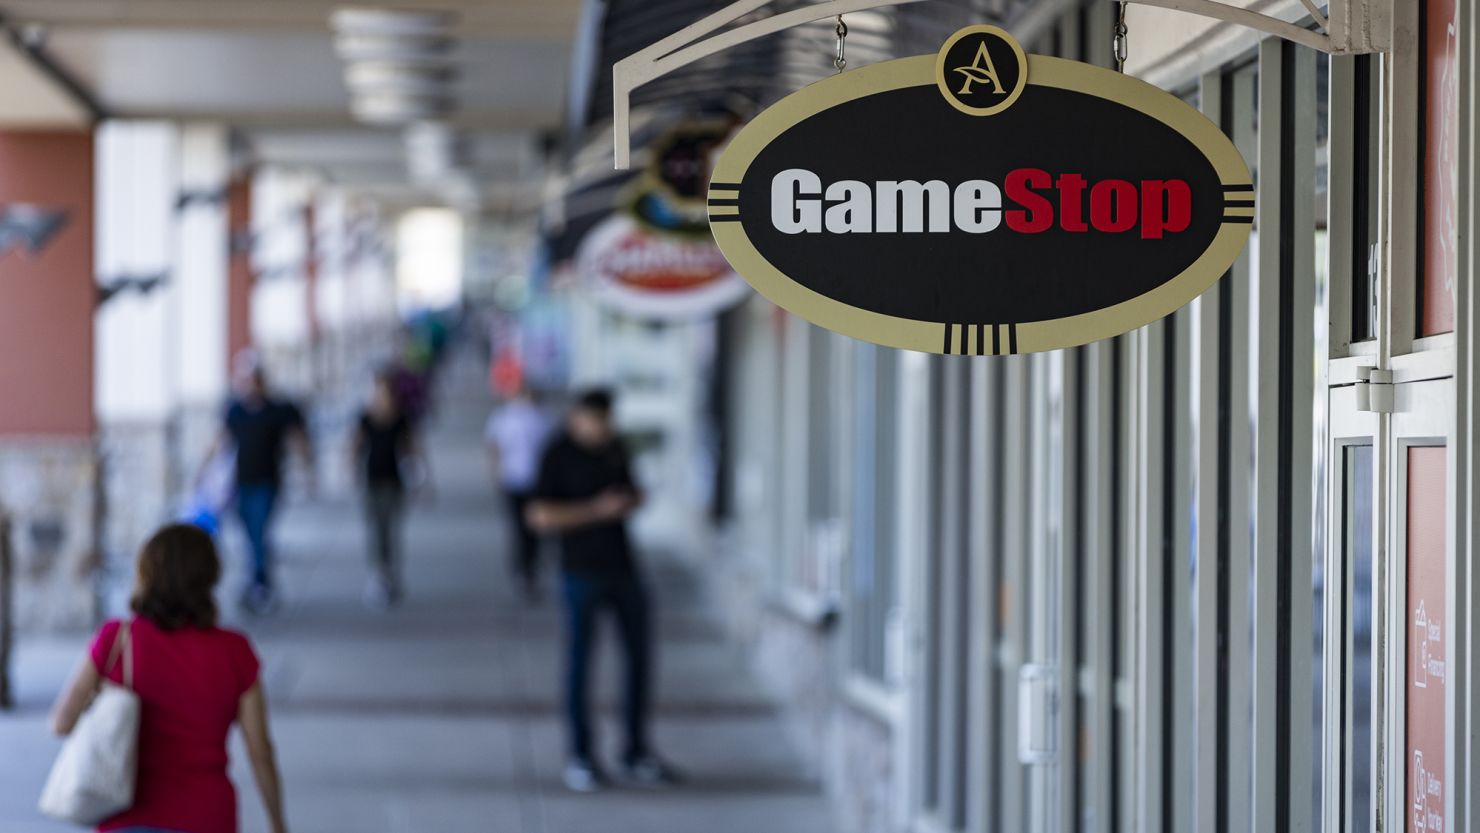 Despite GameStop's stock nearly tripling in two days, little has changed about its fundamentals.